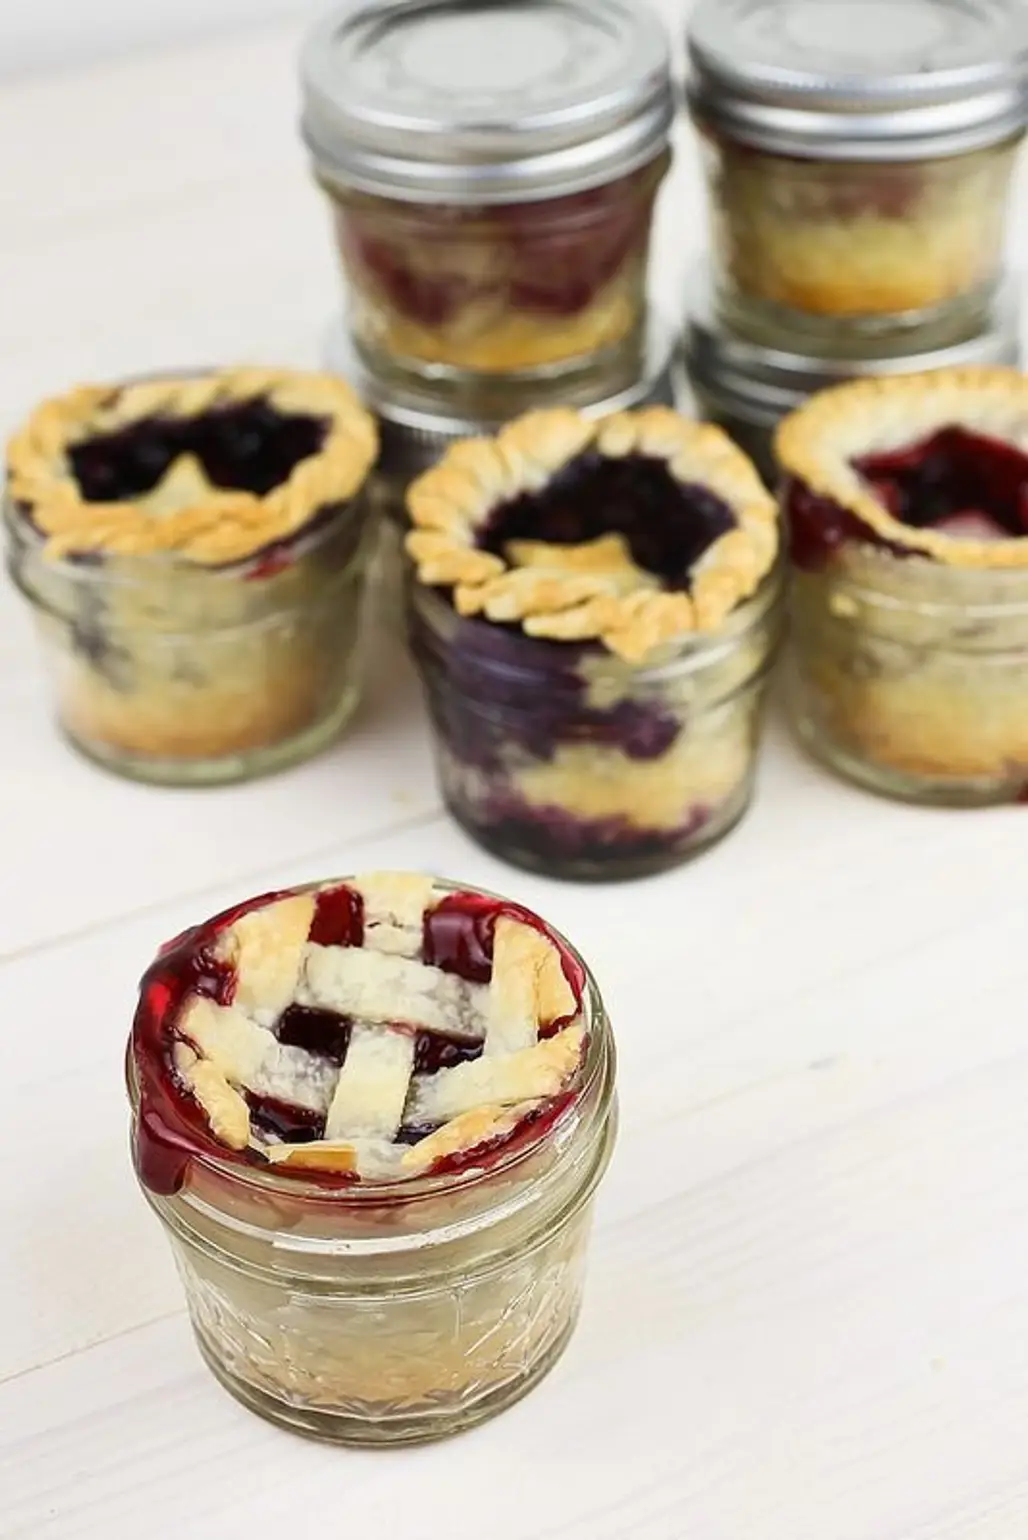 Patriotic Pies in a Jar with Cherry, Blueberry and Blackberry Fillings